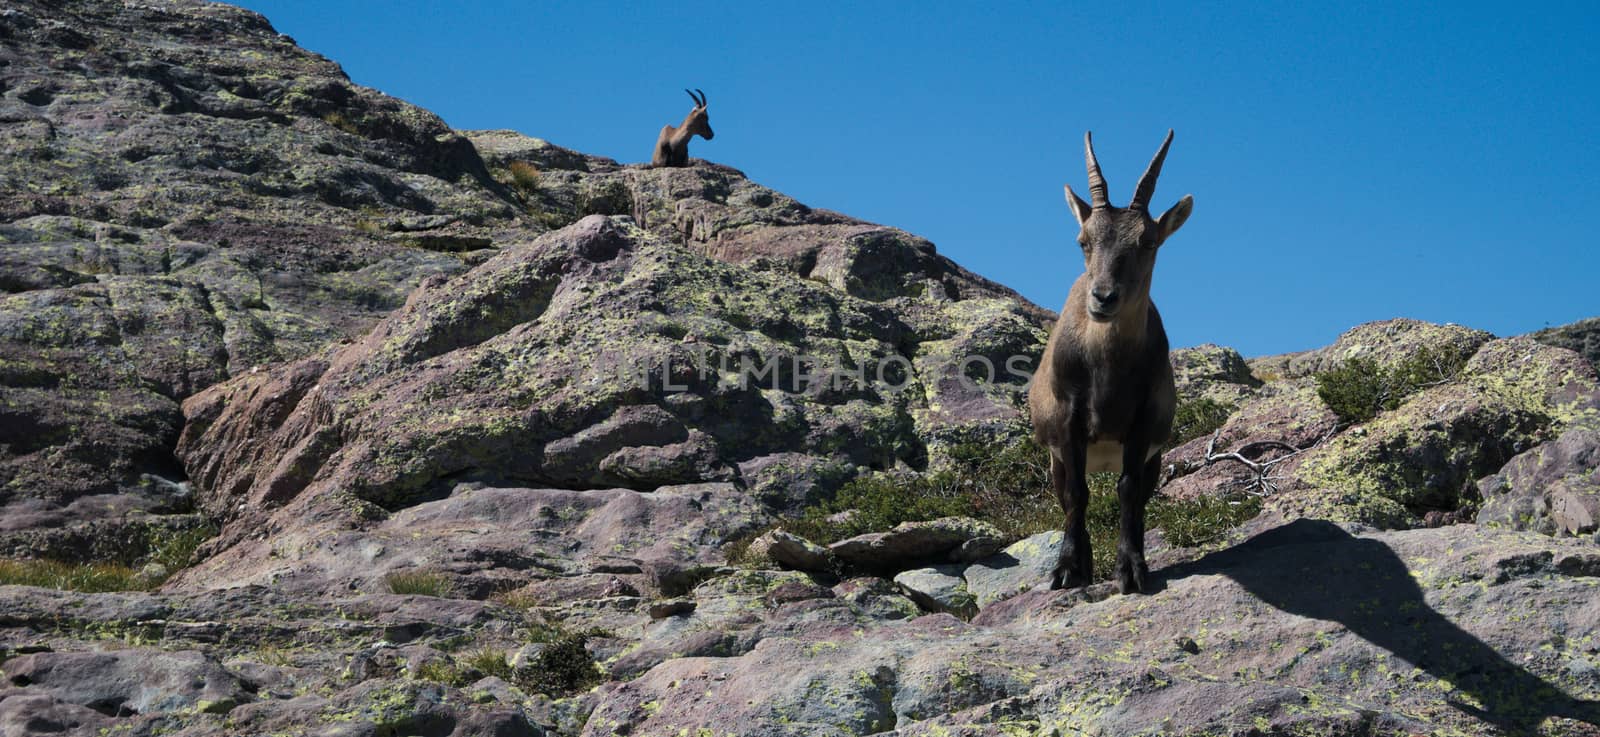 Alpine ibex looking at the camera on top of a peak on the Bergamo Alps, northern Italy
